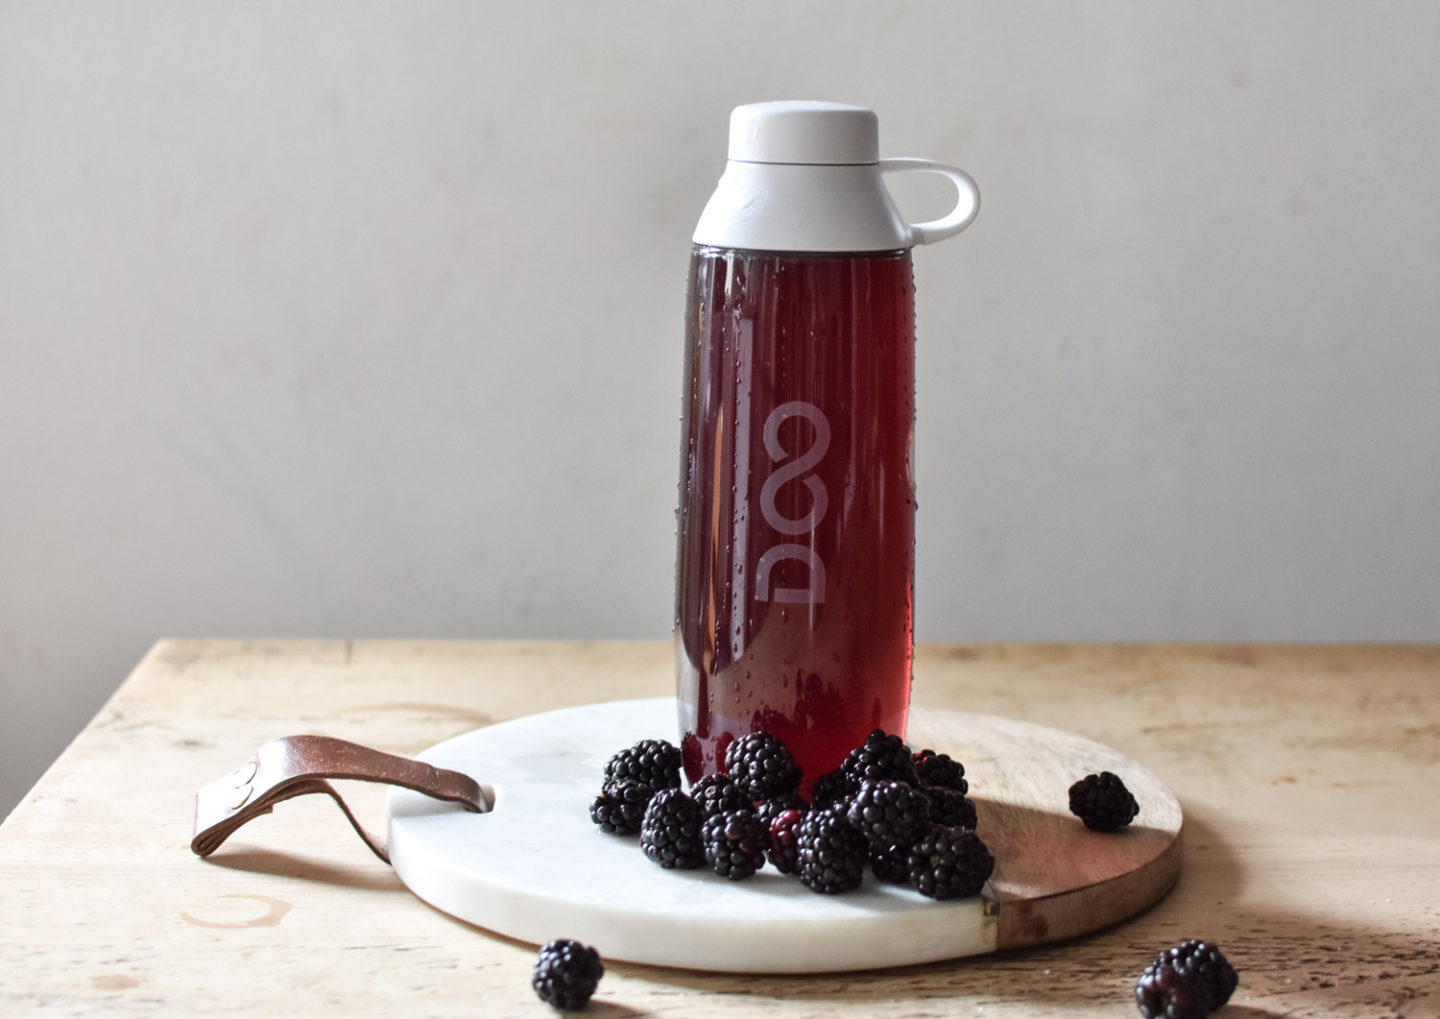 Drinkfinity reusable bottle filled with Charge Pod surrounded by blackberries